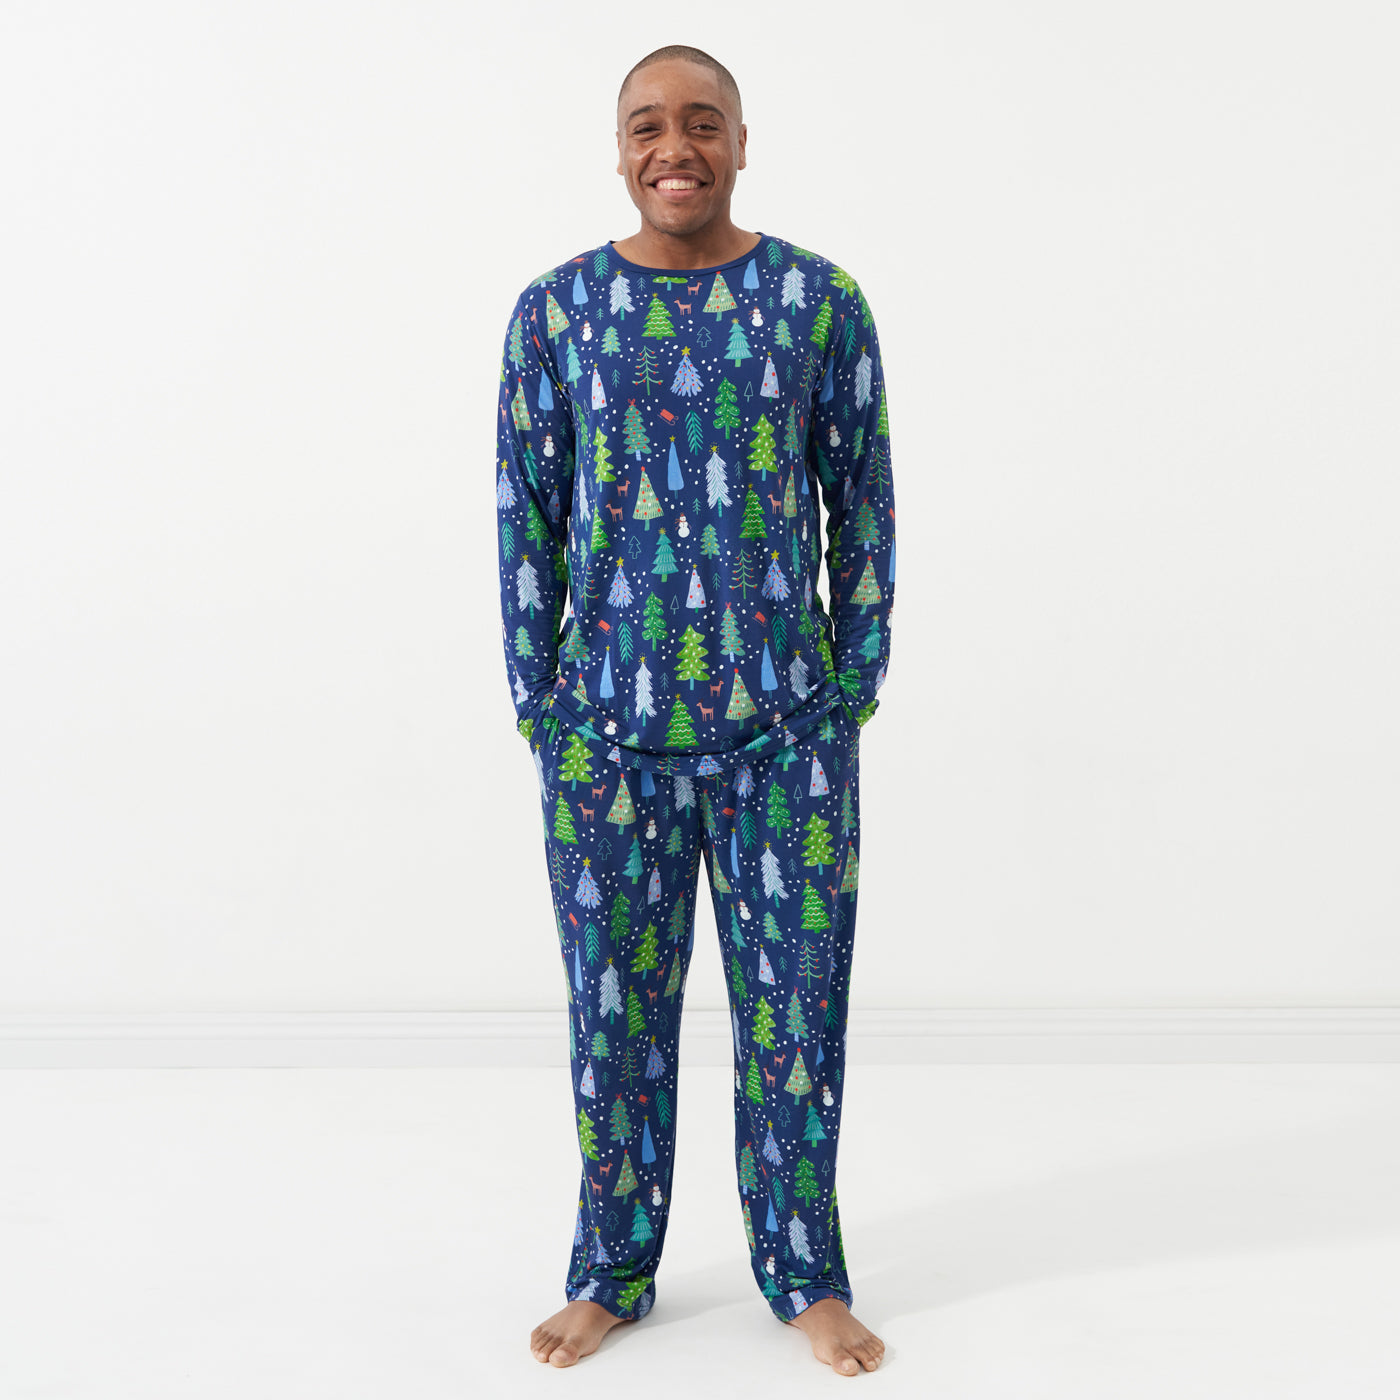 Man posing with his hands in his pockets wearing Blue Merry and Bright printed pajama bottoms and a matching men's Blue Merry and Bright pajama top